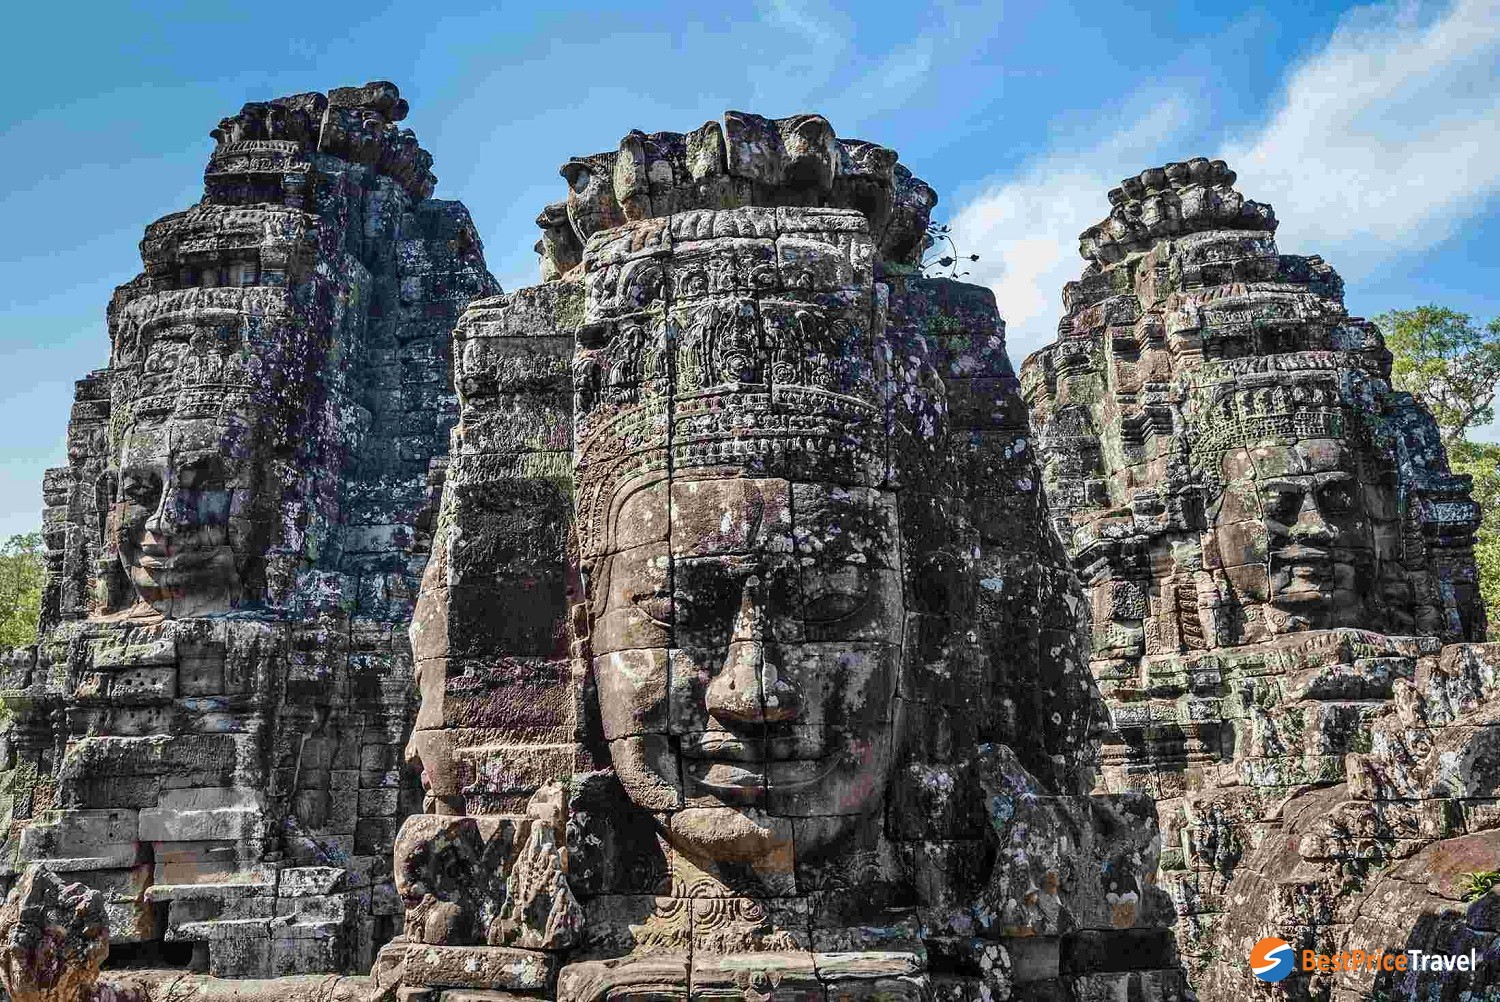 Angkor Smile - a must-visit site in any Angkor complex